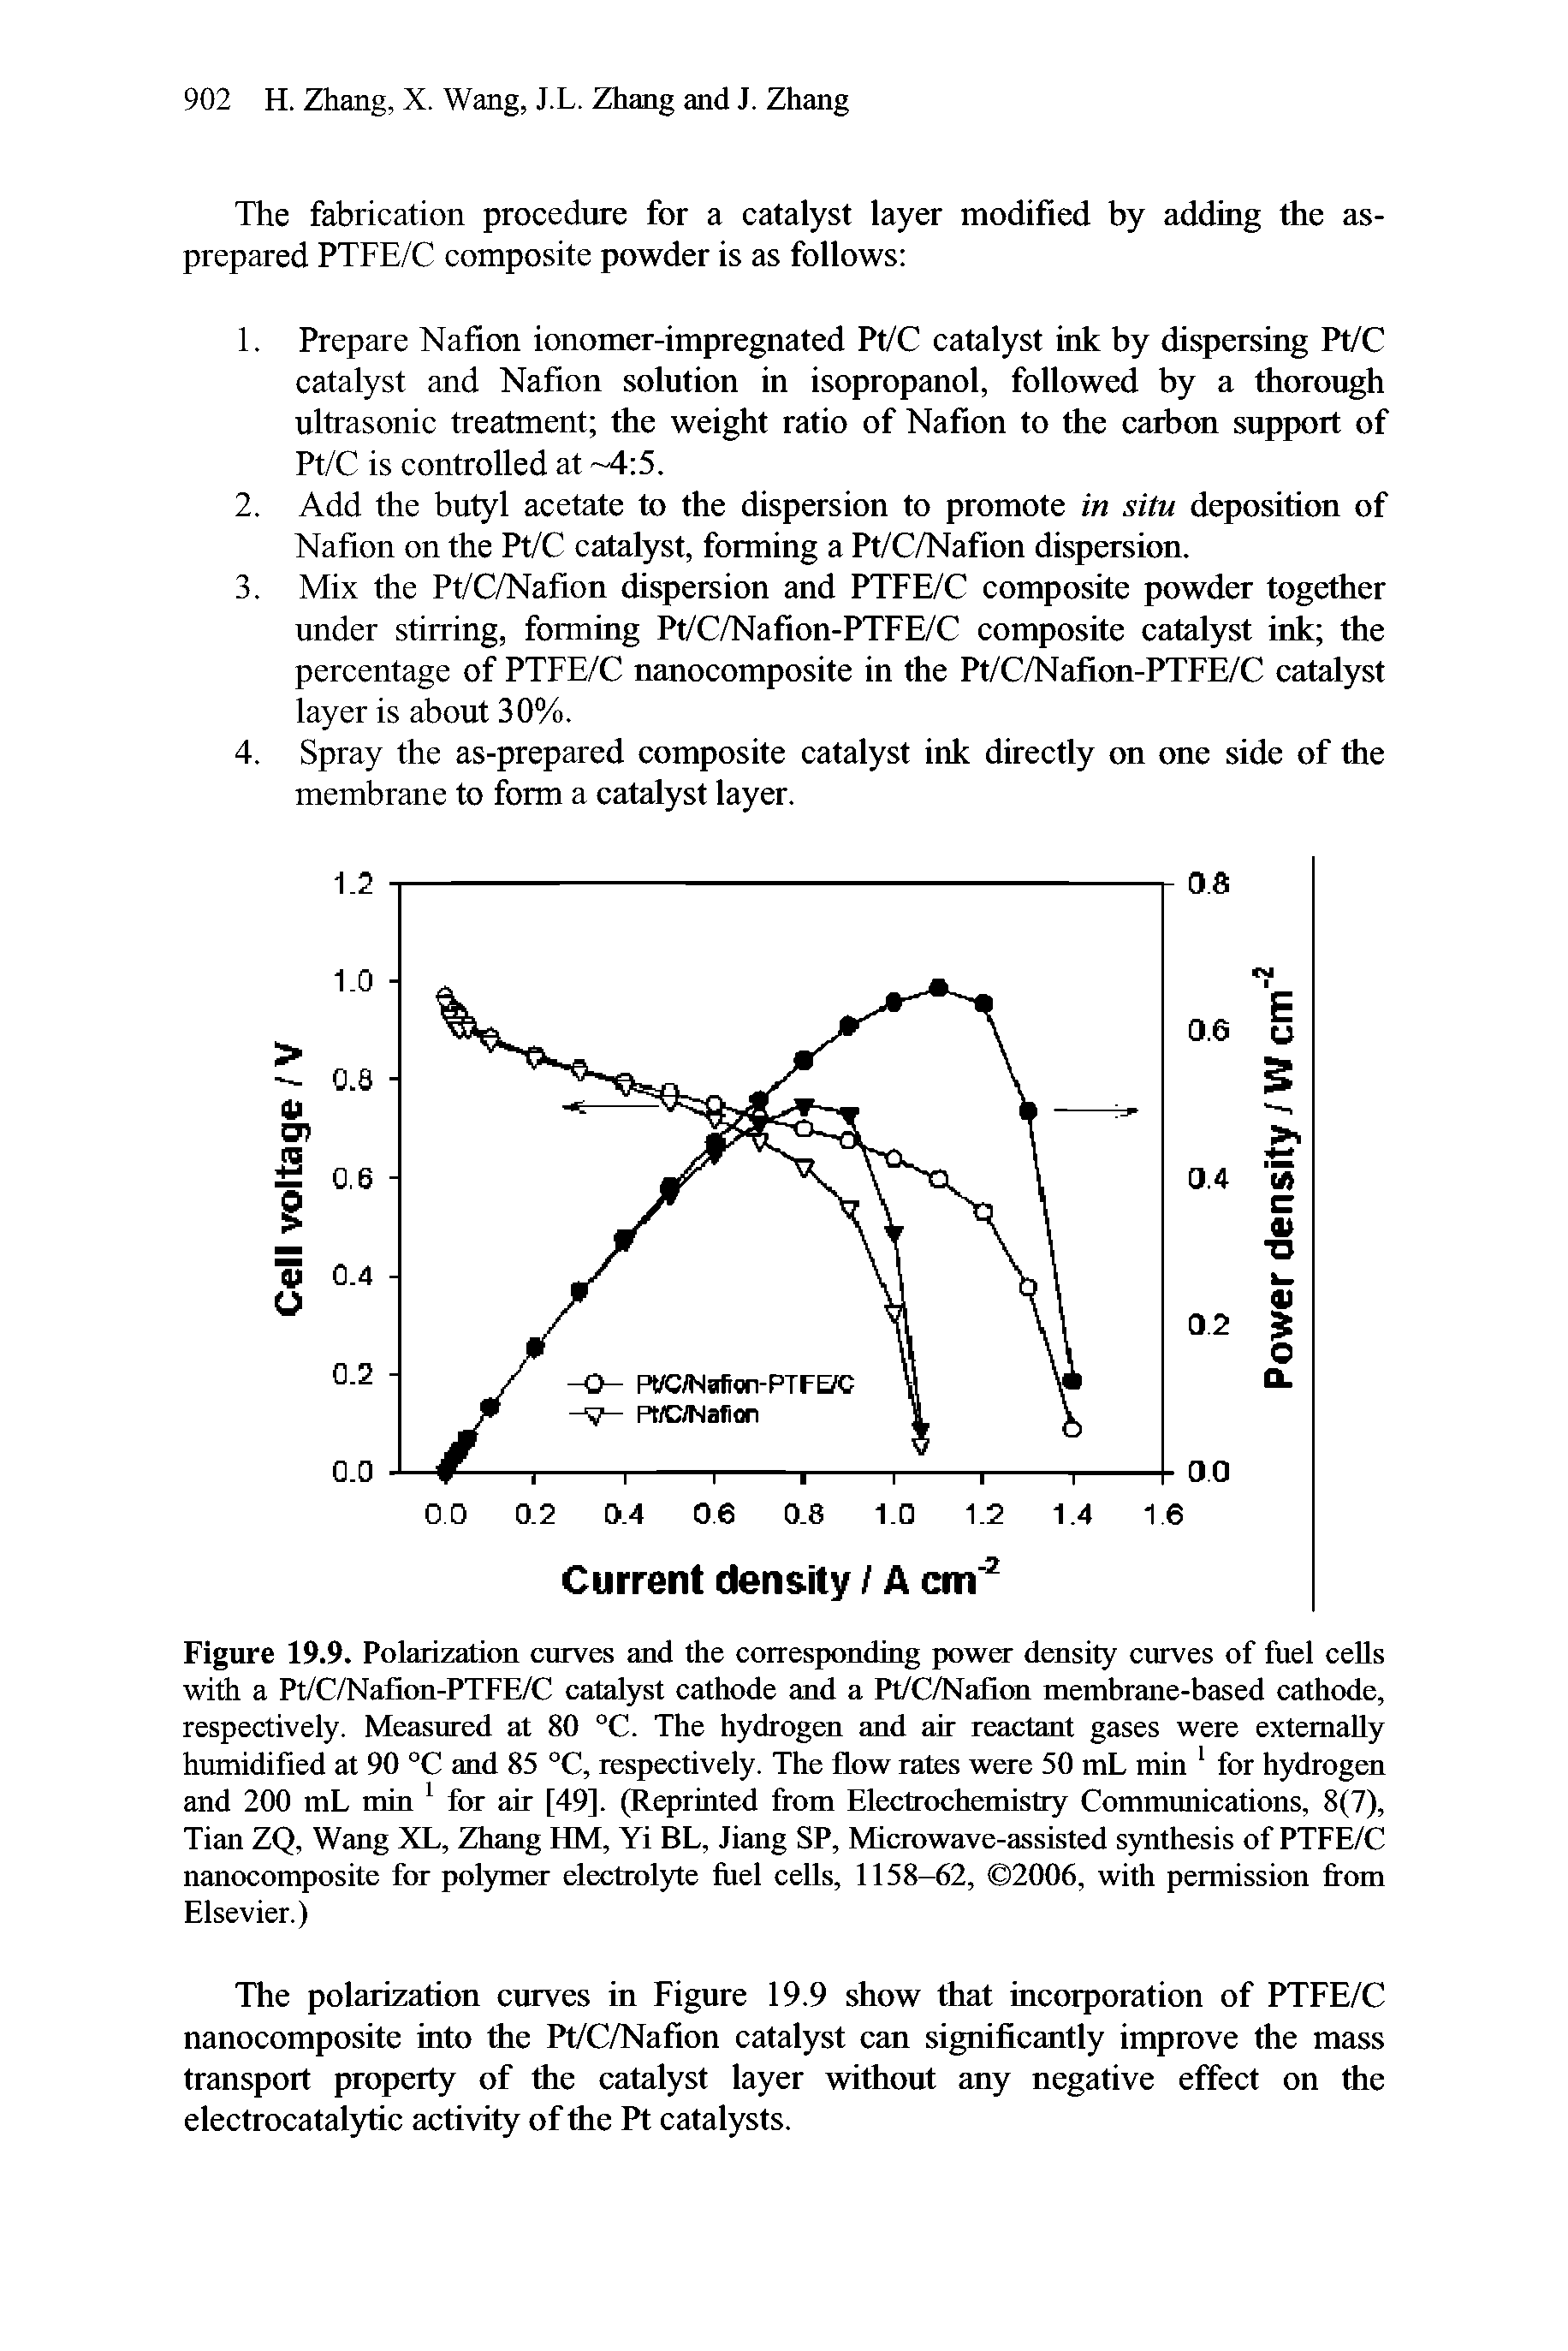 Figure 19.9. Polarization curves and the corresponding power density curves of fuel cells with a Pt/C/Nafion-PTFE/C eatalyst cathode and a Pt/C/Nafion membrane-based cathode, respectively. Measured at 80 °C. The hydrogen and air reactant gases were externally humidified at 90 °C and 85 °C, respectively. The flow rates were 50 mL min for hydrogen and 200 mL min for air [49]. (Reprinted from Eleetroehemistry Communications, 8(7), Tian ZQ, Wang XL, Zhang HM, Yi BL, Jiang SP, Microwave-assisted sjmthesis of PTFE/C nanocomposite for polymer electrol)4e fuel cells, 1158-62, 2006, with permission from Elsevier.)...